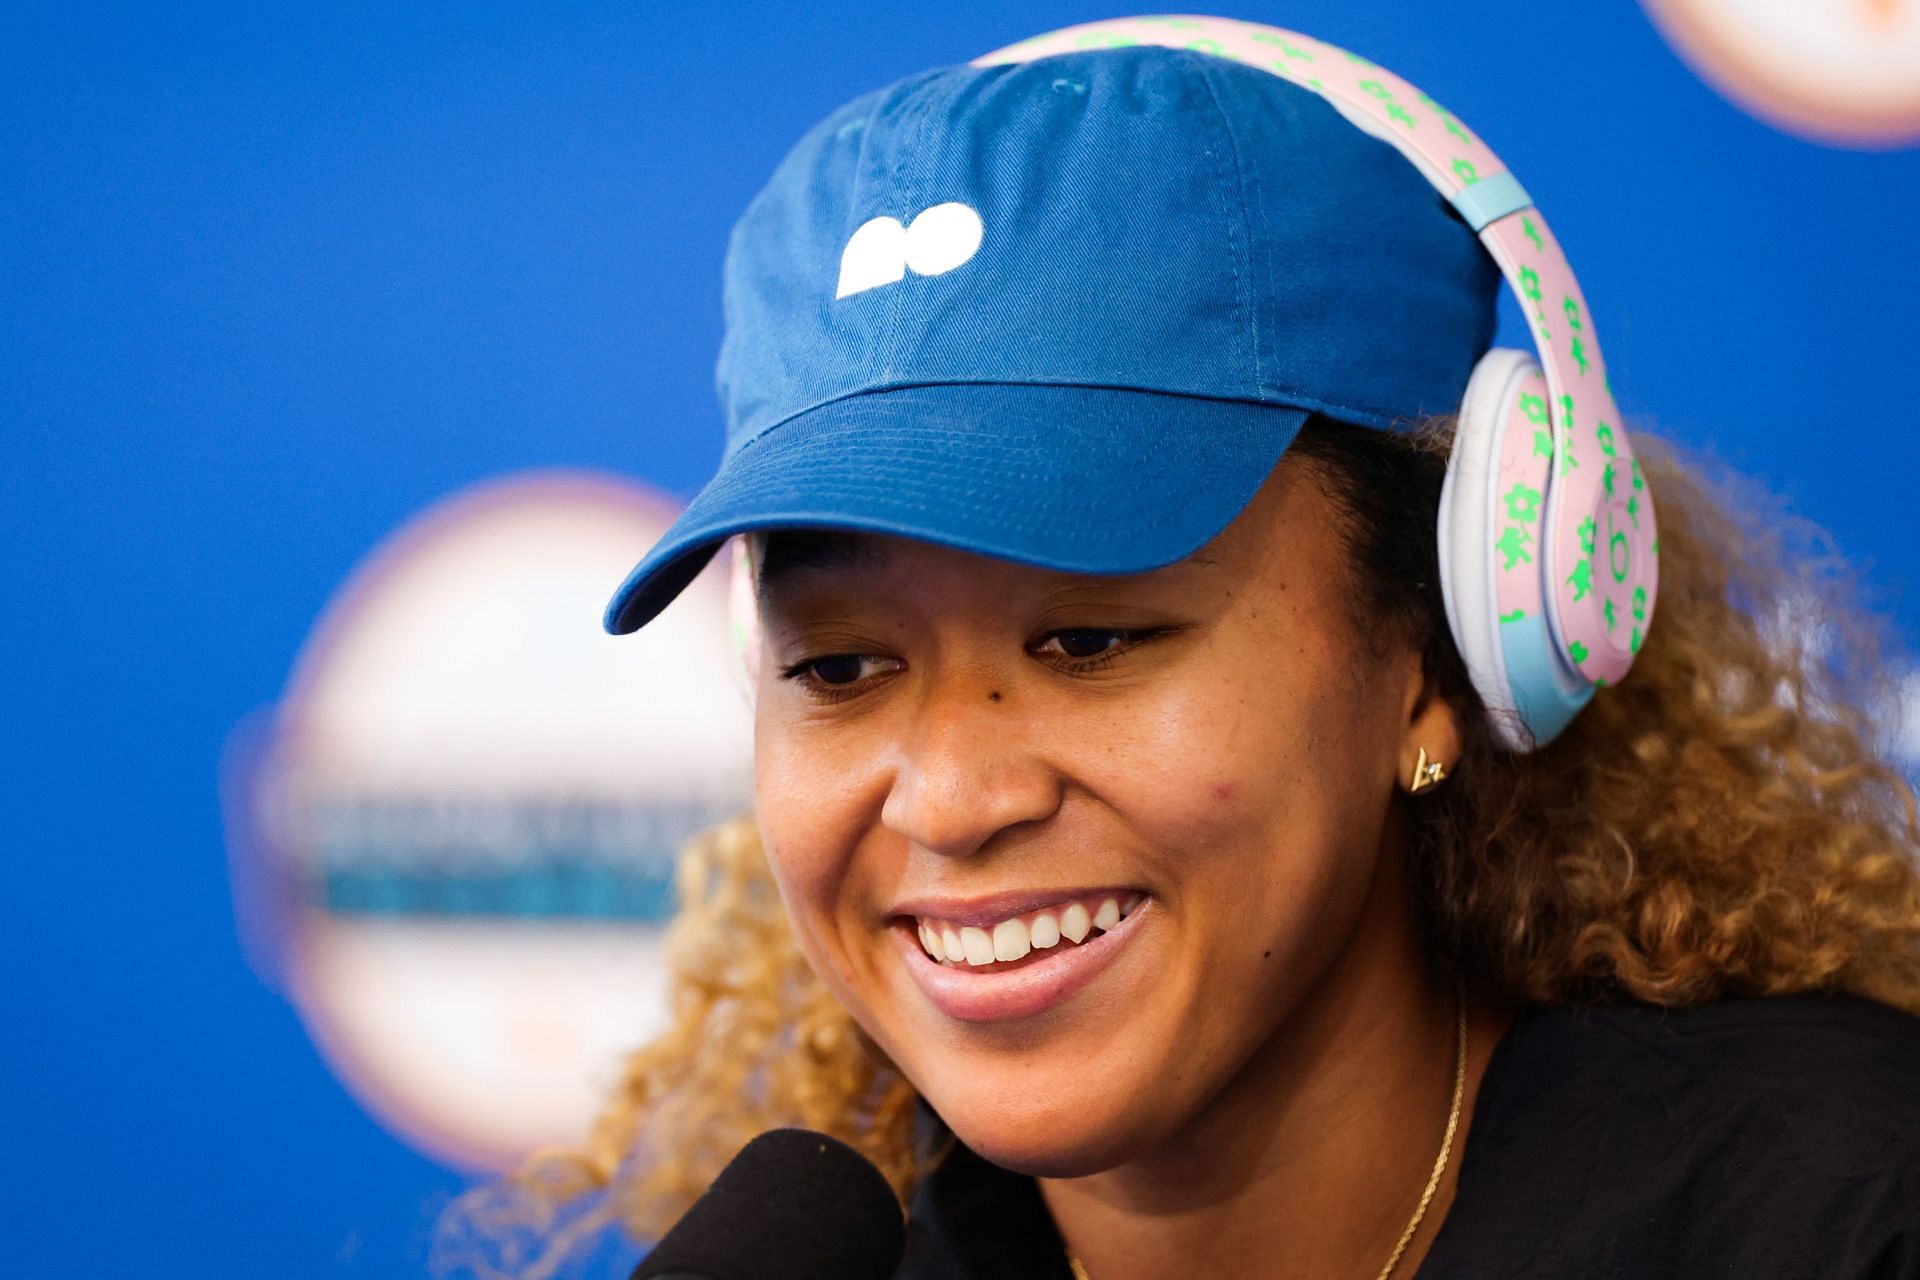 Naomi Osaka remains gracious to her supporters despite a loss